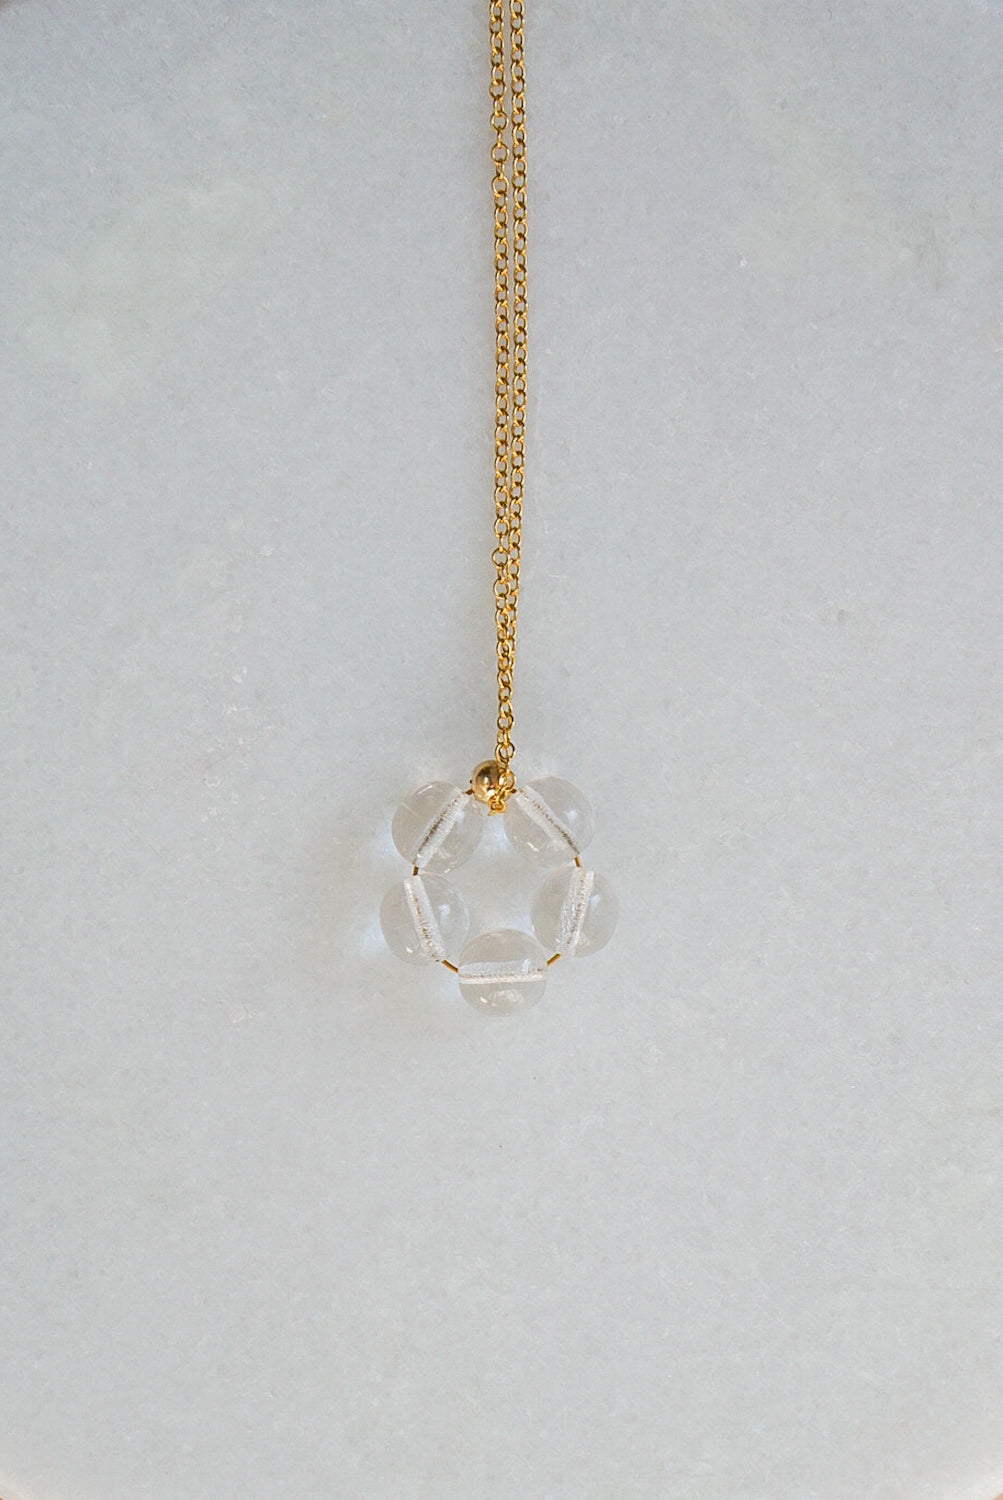 Petal - Gold Filled necklace with pendant